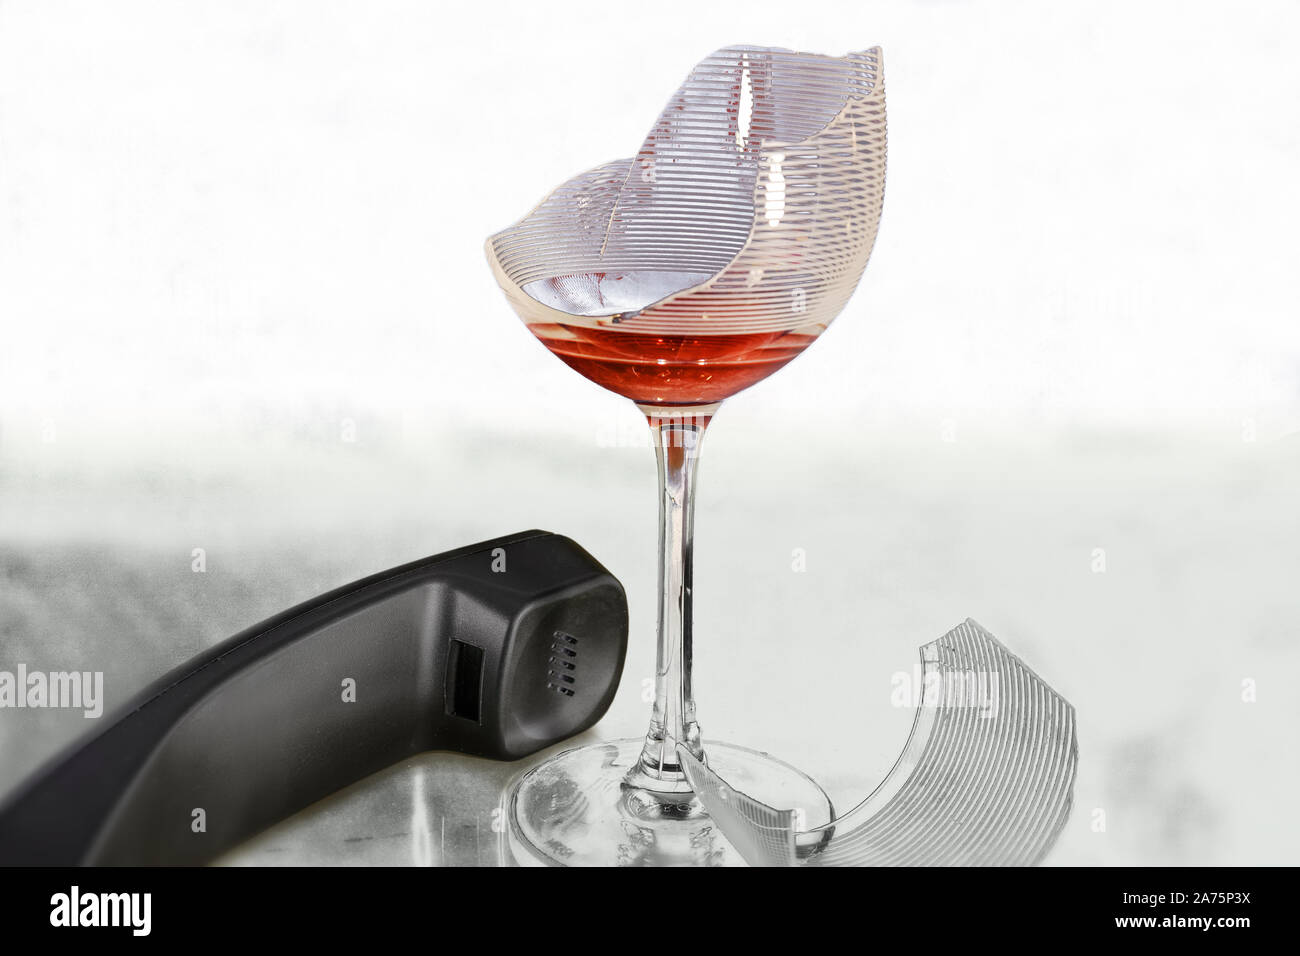 A broken wine glass and a phone receiver next to it. High key, high contrast and copy space. Stock Photo